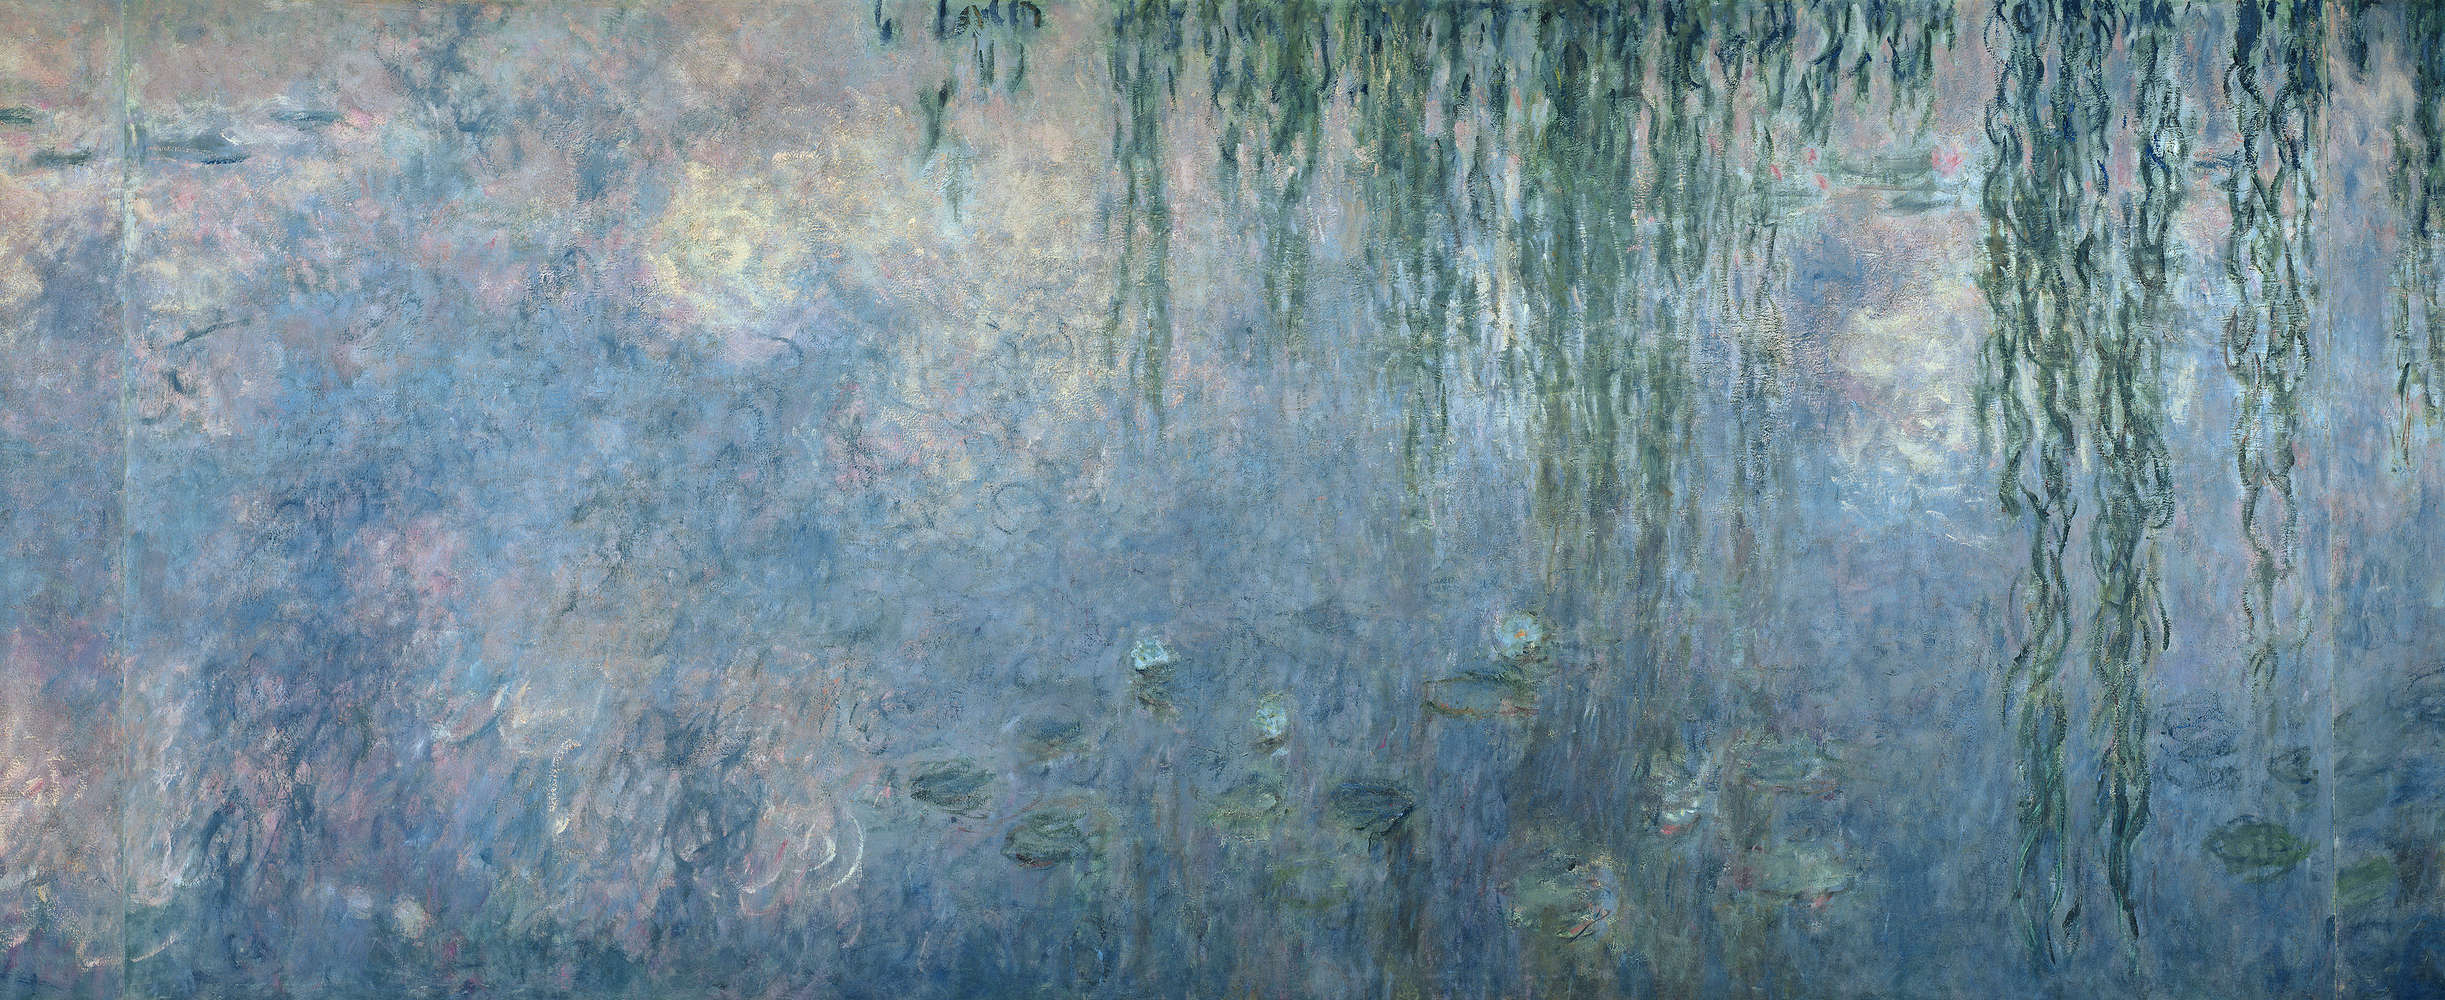             Photo wallpaper "Water lilies: morning with weeping willows" detail by Claude Monet
        